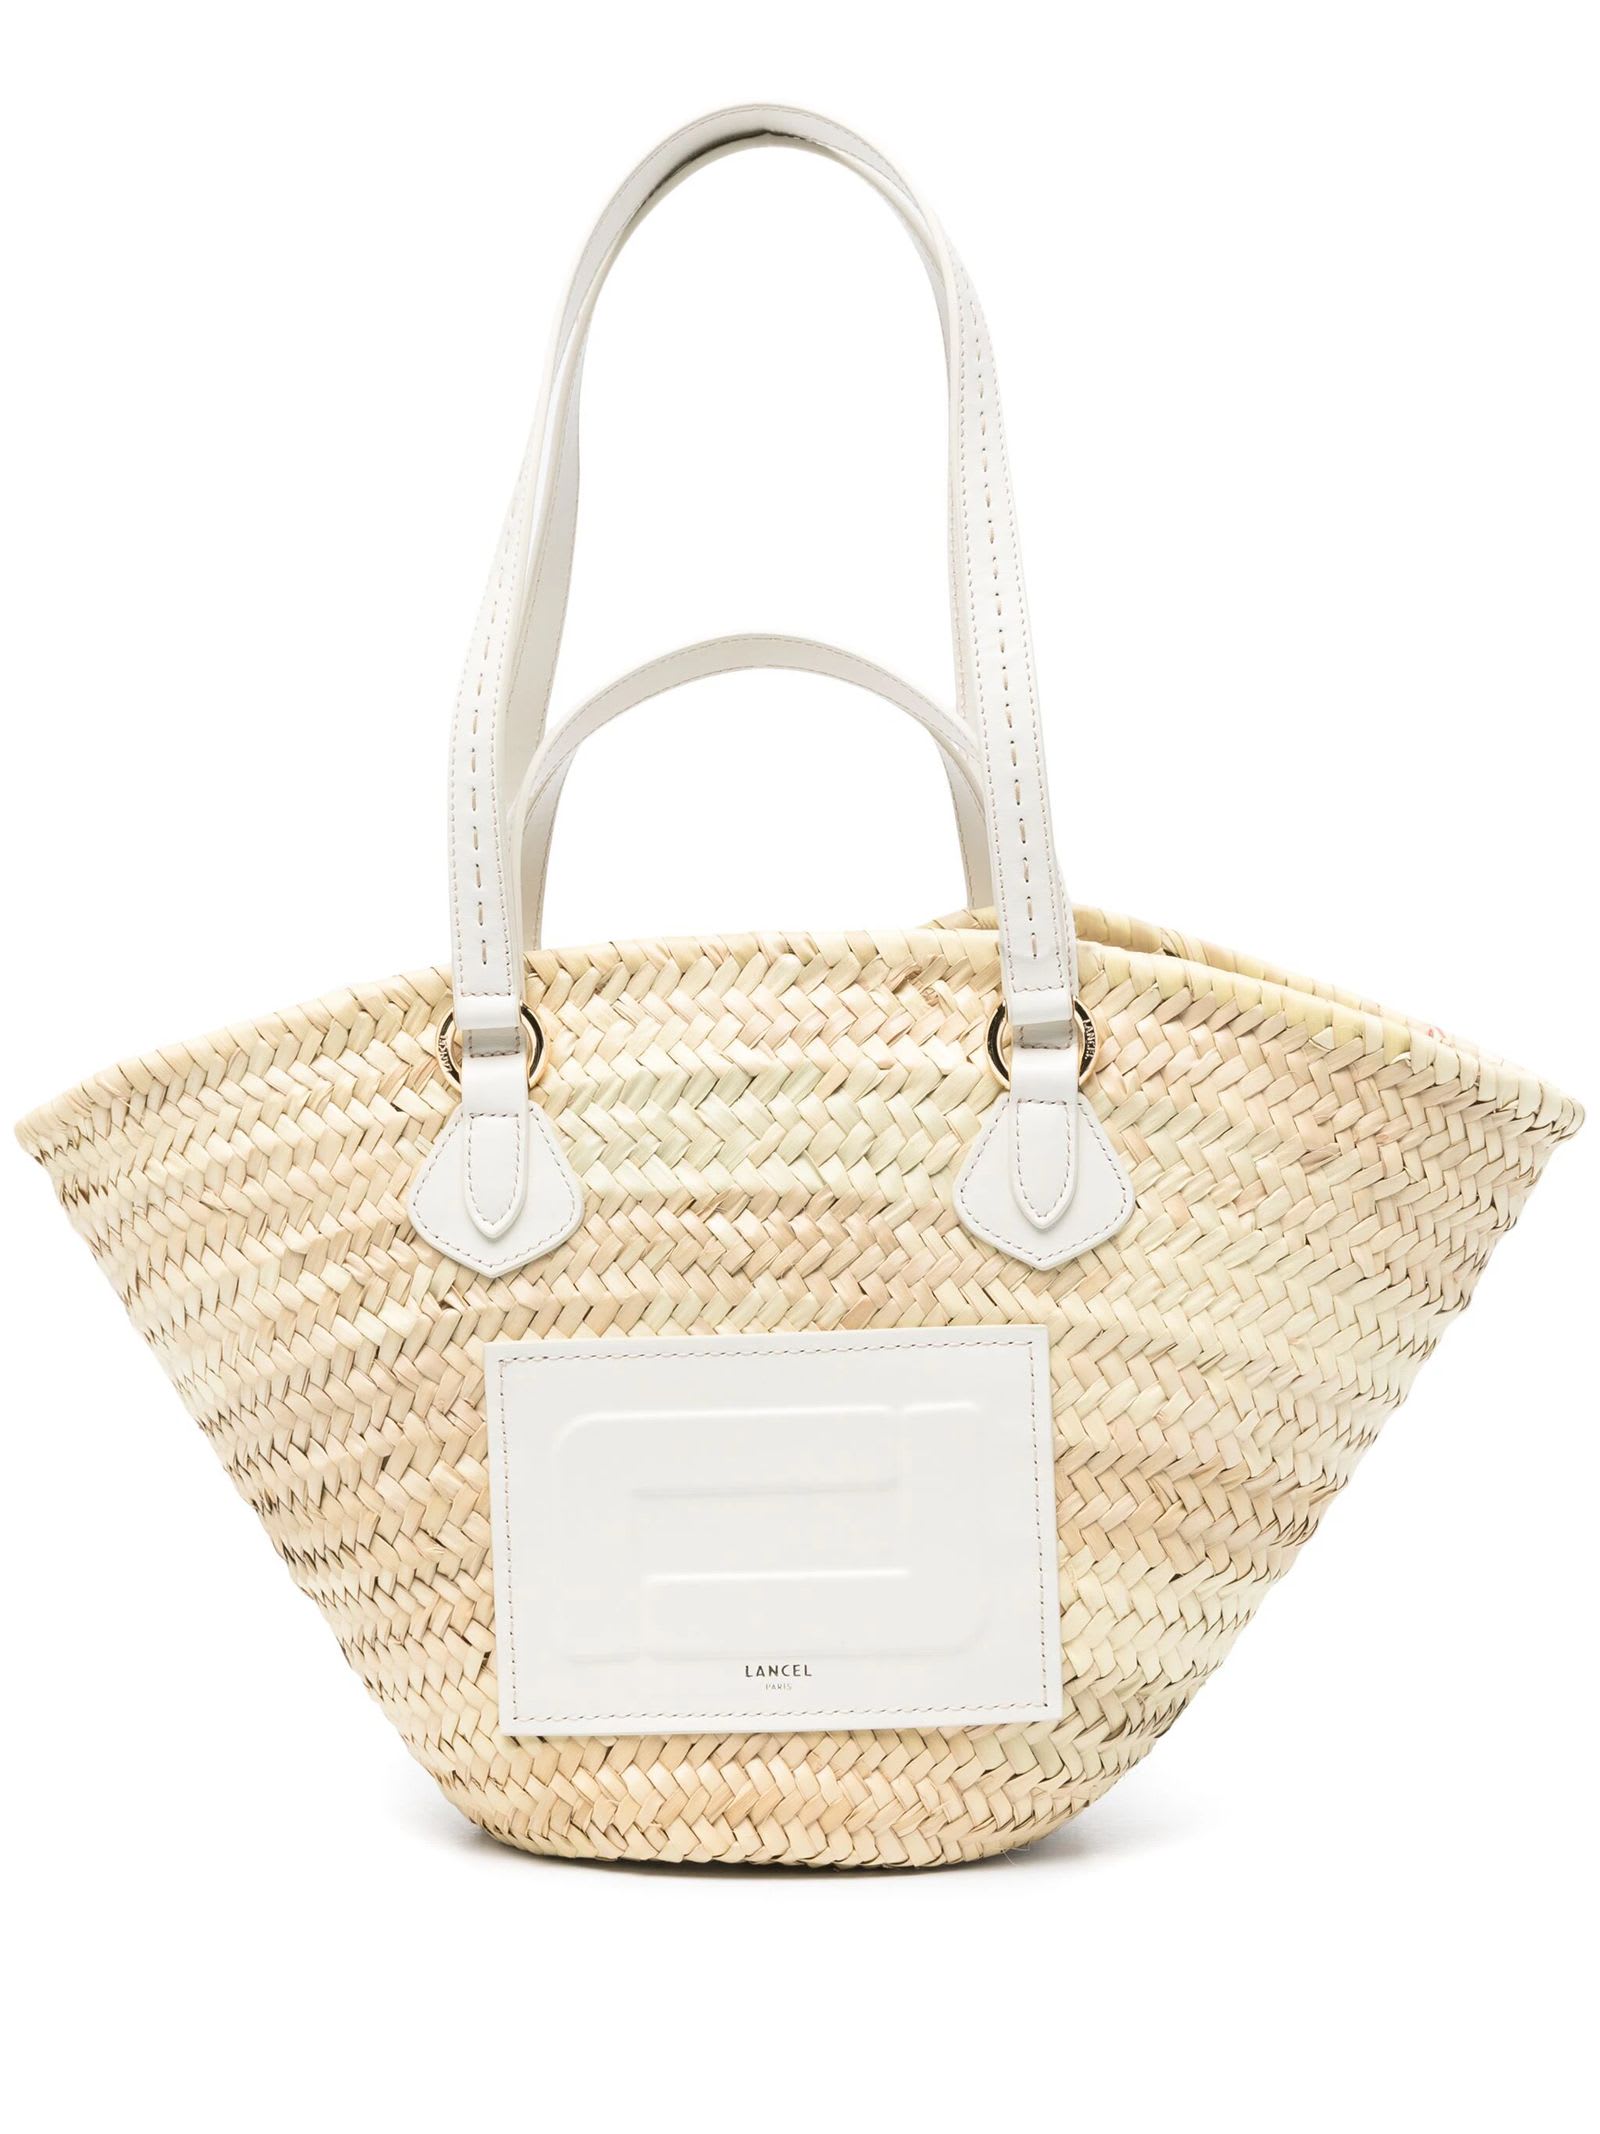 Lancel Light Beige And White Straw Beach Bag In A Natural Snow